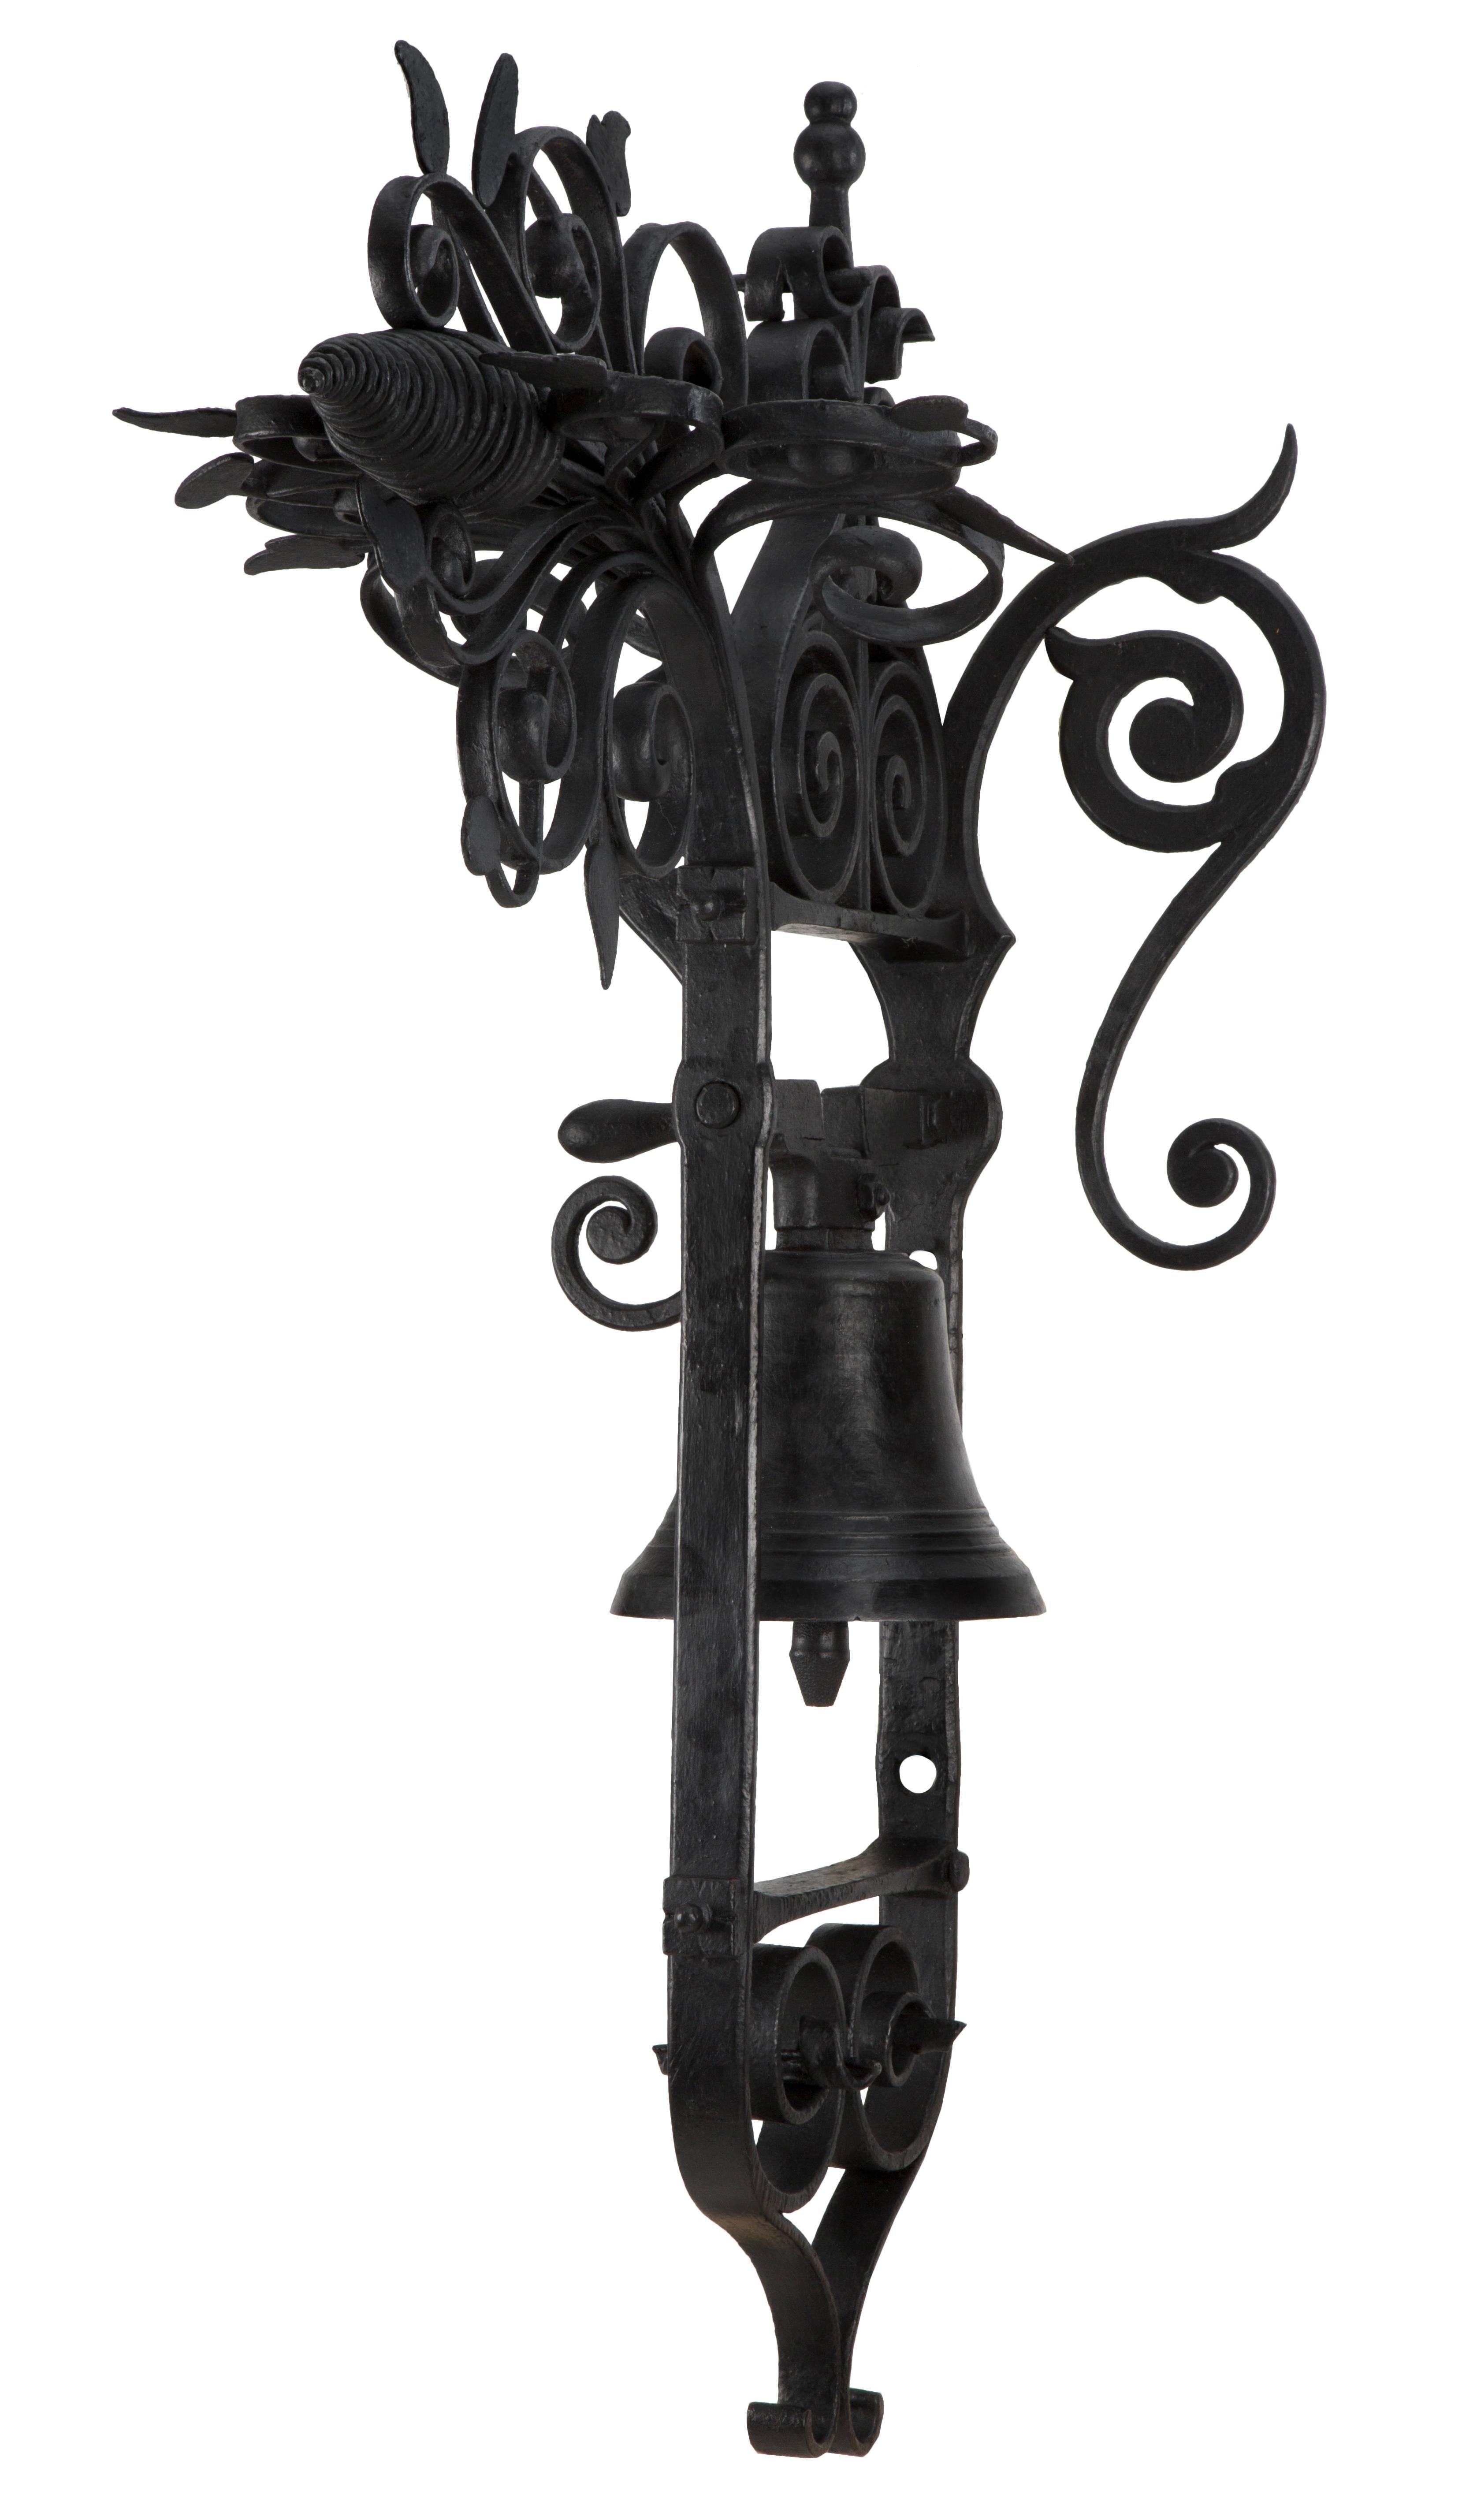 A unique and most decorative Italian 19th century wrought iron bell. The functioning bell is centred by an impressive hand beaten frame. Below and above are incredible and wonferfully executed scrolled patterns while the top displays a foliate and